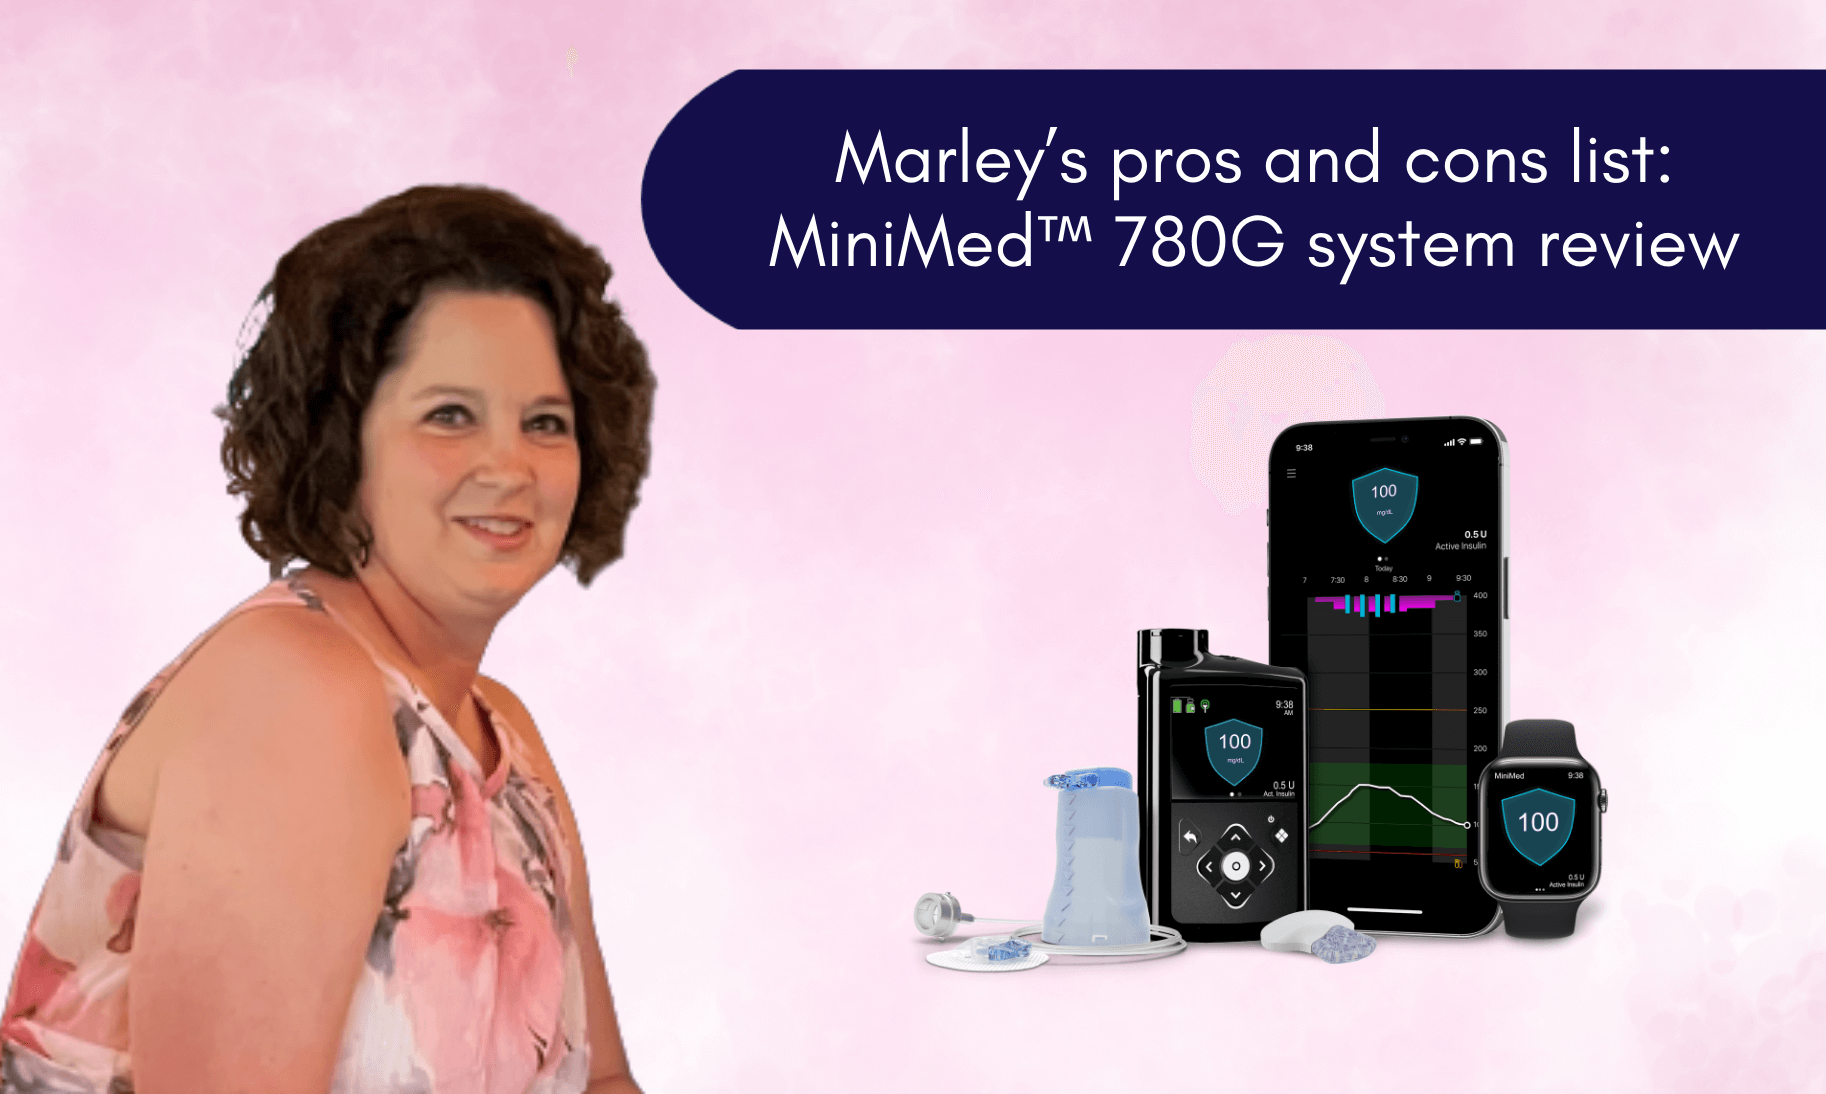 Medtronic Champion Marley with MiniMed 780G system